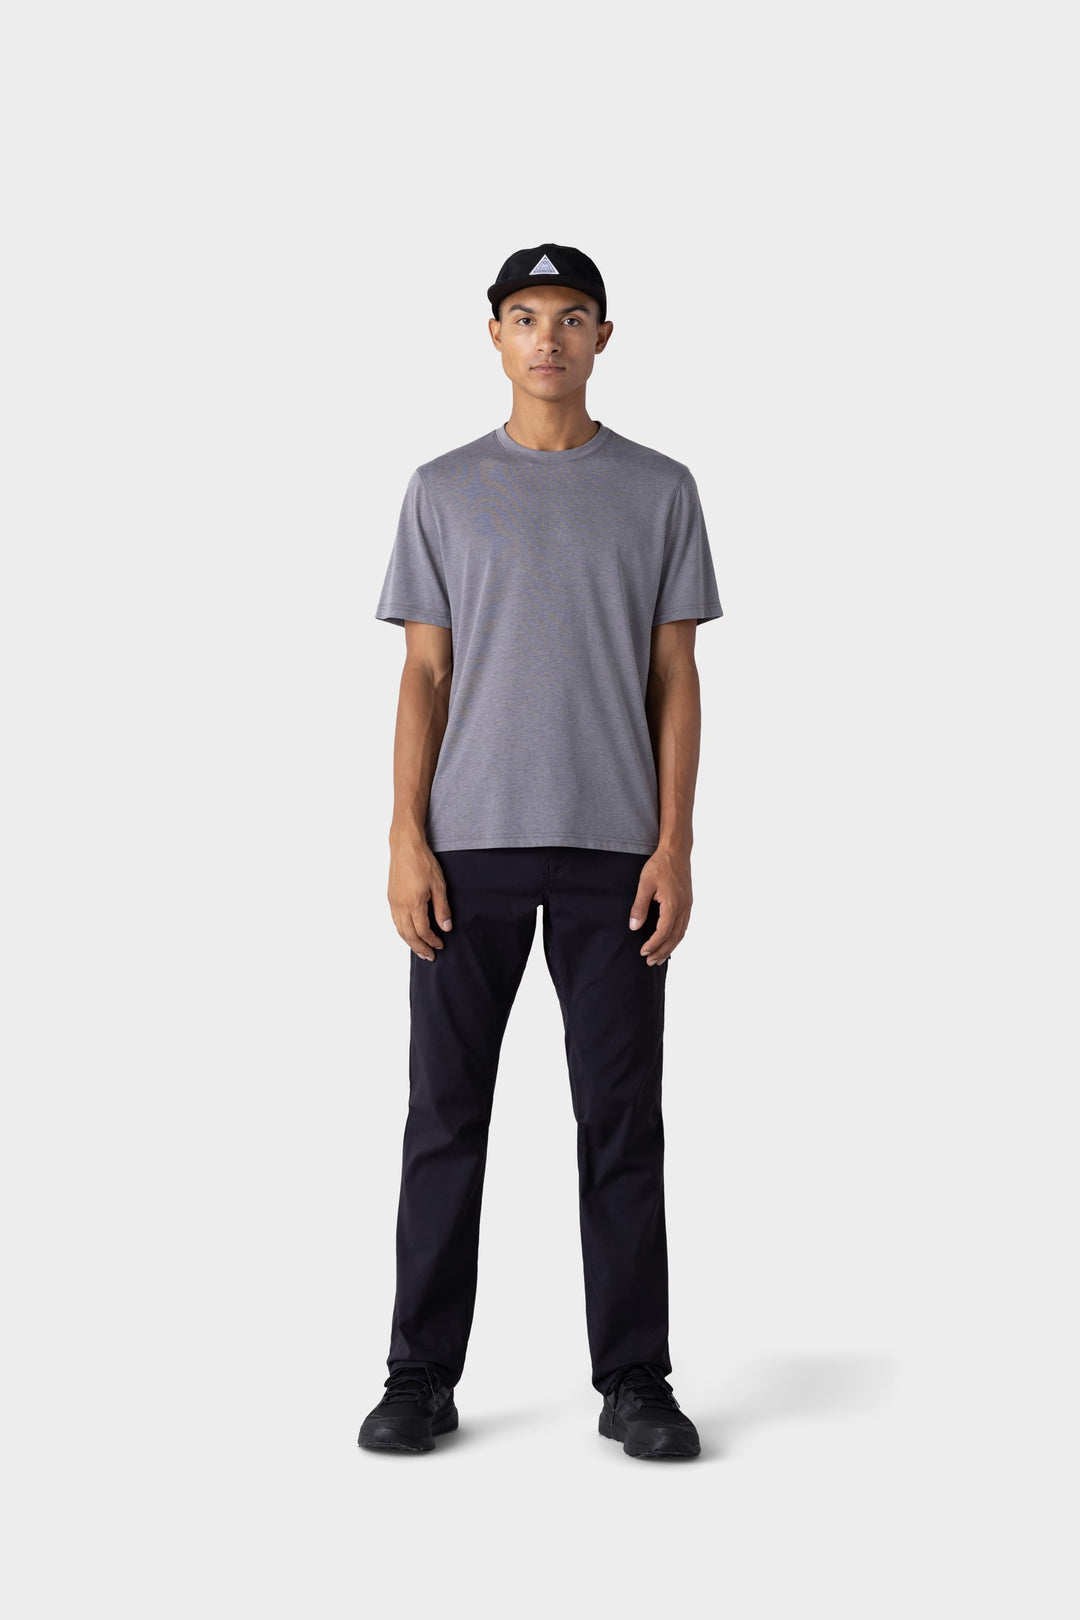 686 Everywhere Pant Relaxed Fit - Black - Sun Diego Boardshop